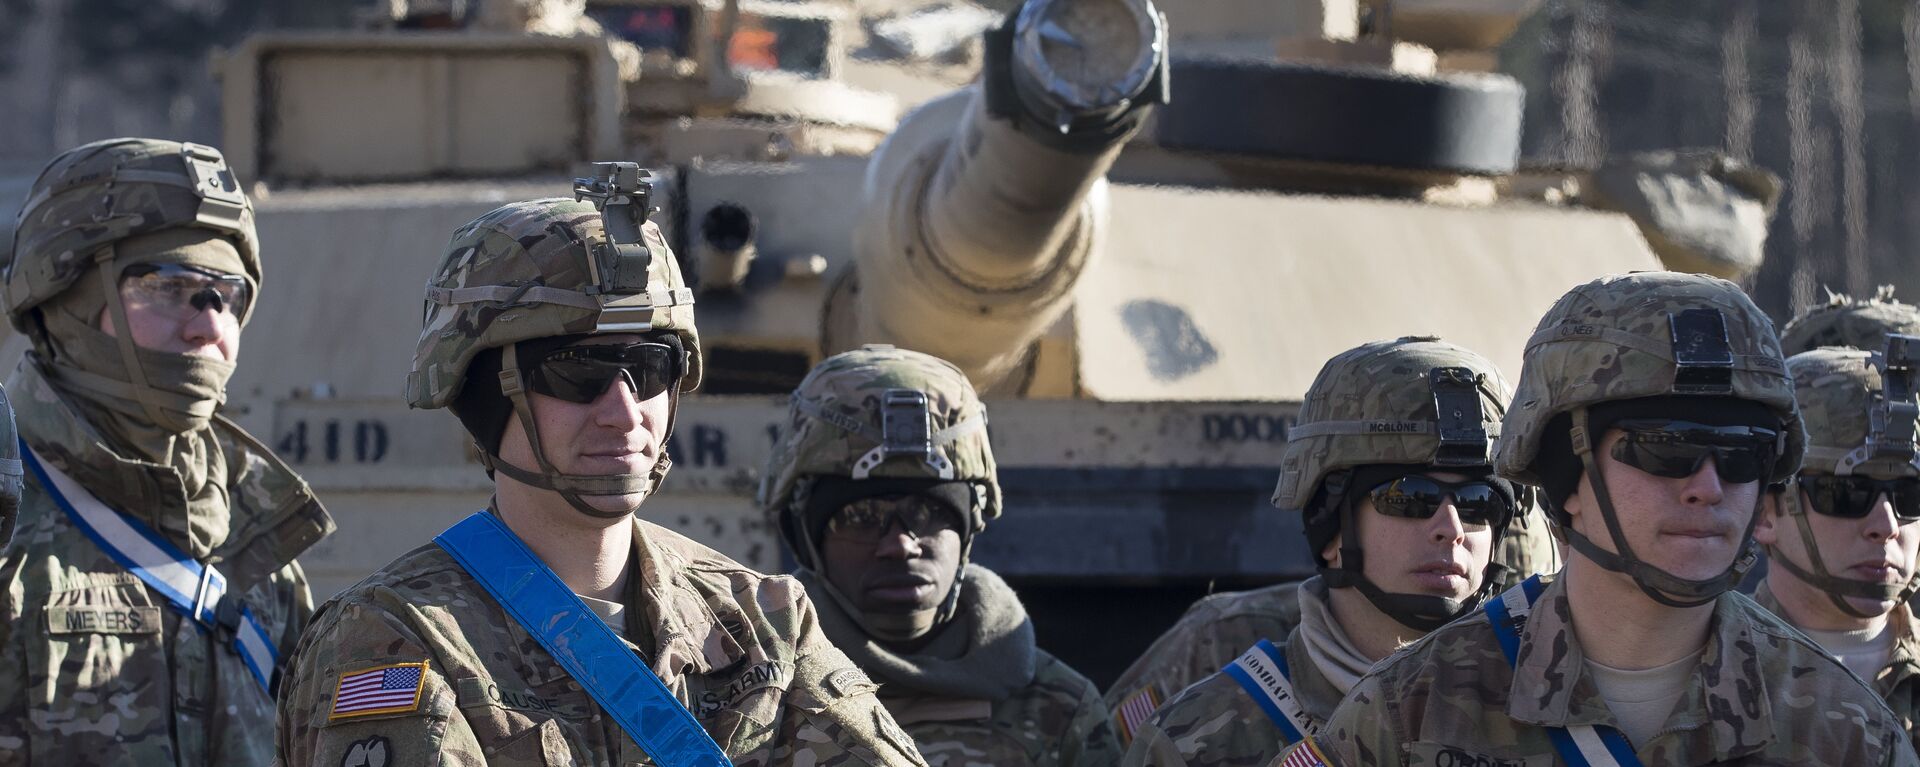 Members of the US Army's 4th Infantry Division 3rd Brigade Combat Team 68th Armoured Regiment 1st Battalion stand in front of an Abrams battle tank after arriving at the Gaiziunai railway station, some 110 kms (69 miles) west of the capital Vilnius, Lithuania, Friday, 10 February 2017. - Sputnik International, 1920, 24.12.2021